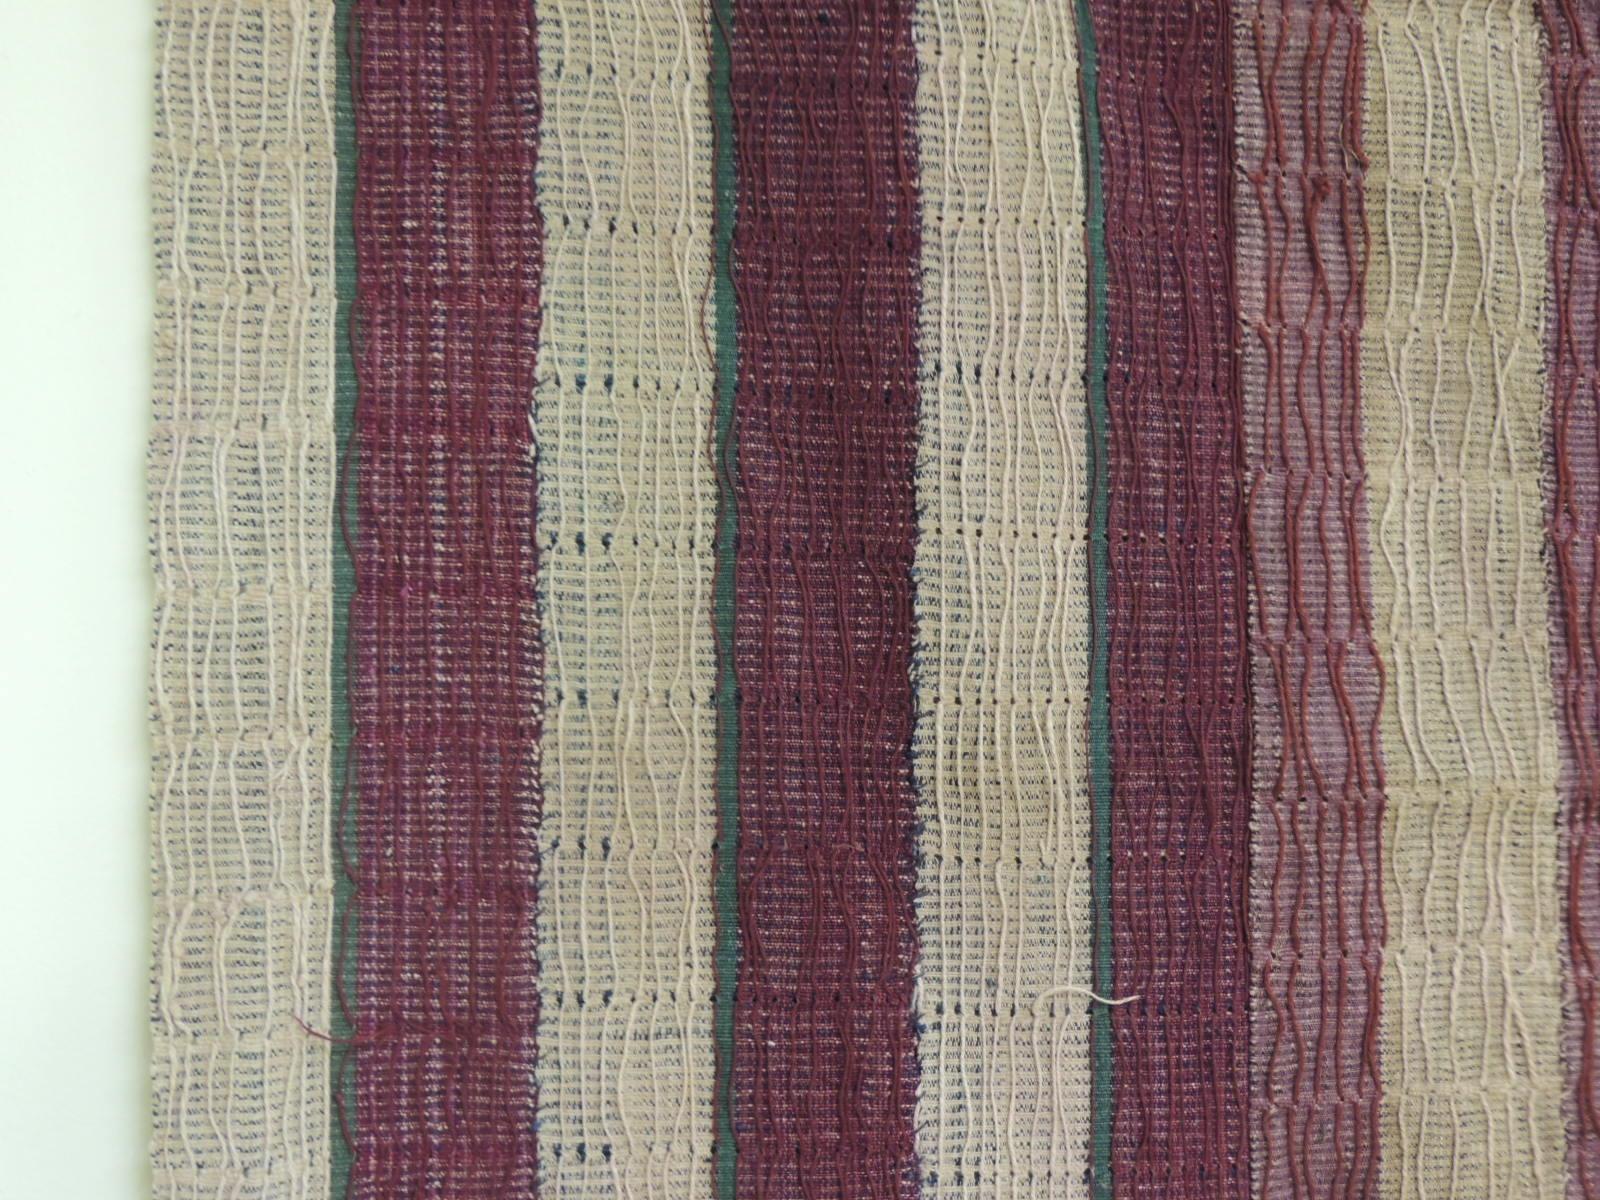 Large vintage purple and brown Yoruba Stripe African Textile.
The Yoruba are highly fashion-conscious people. Colors change from season to season and such non-traditional fibers as Lurex can be introduced into strip woven cloth. A common form of